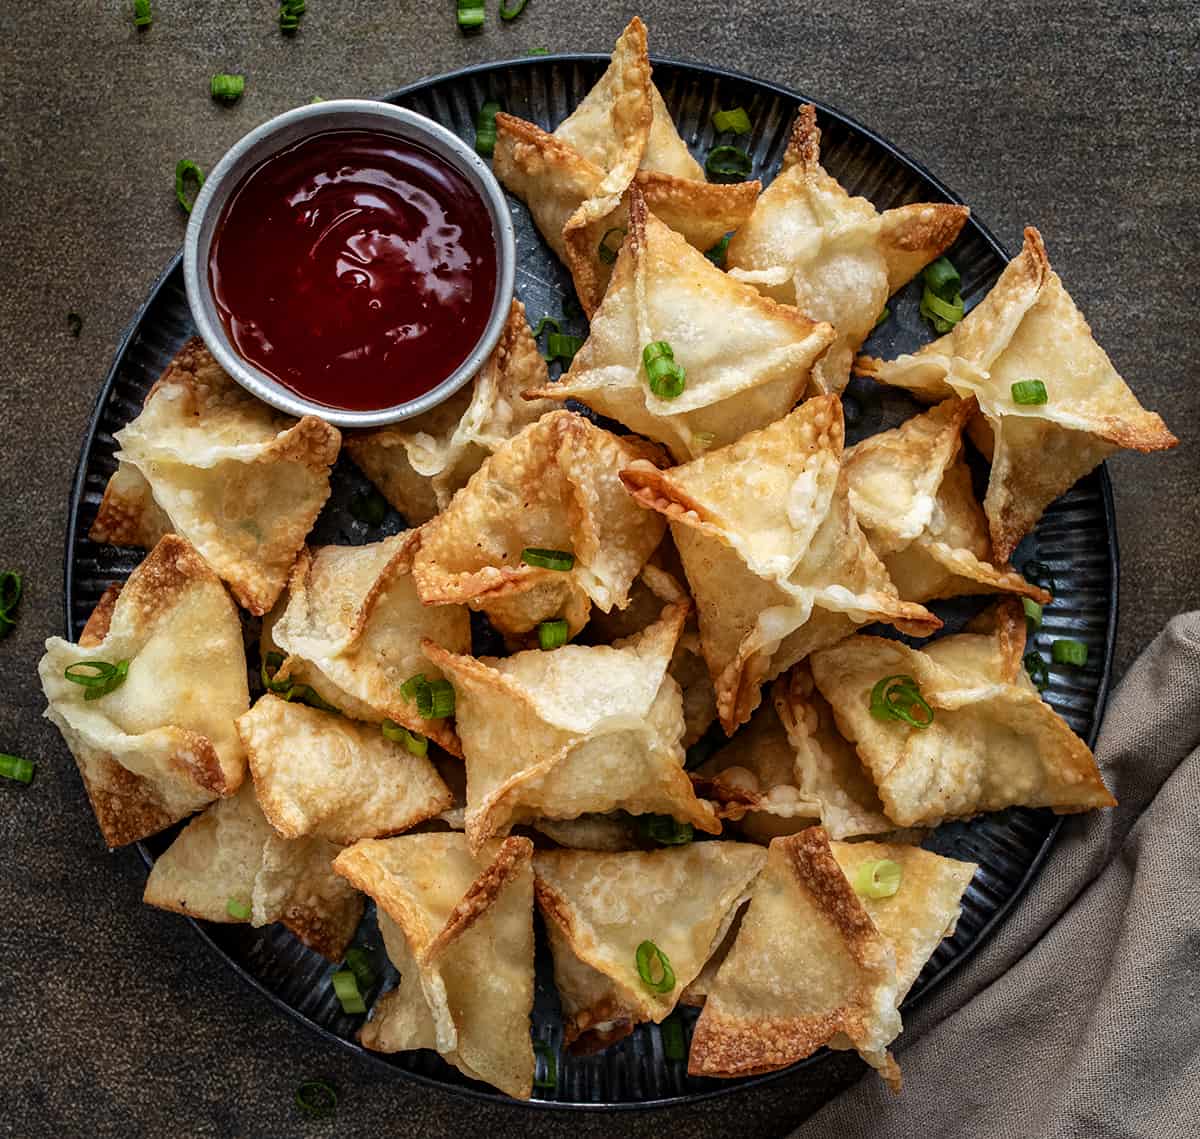 Platter of Crab Rangoon with Sauce from Overhead.